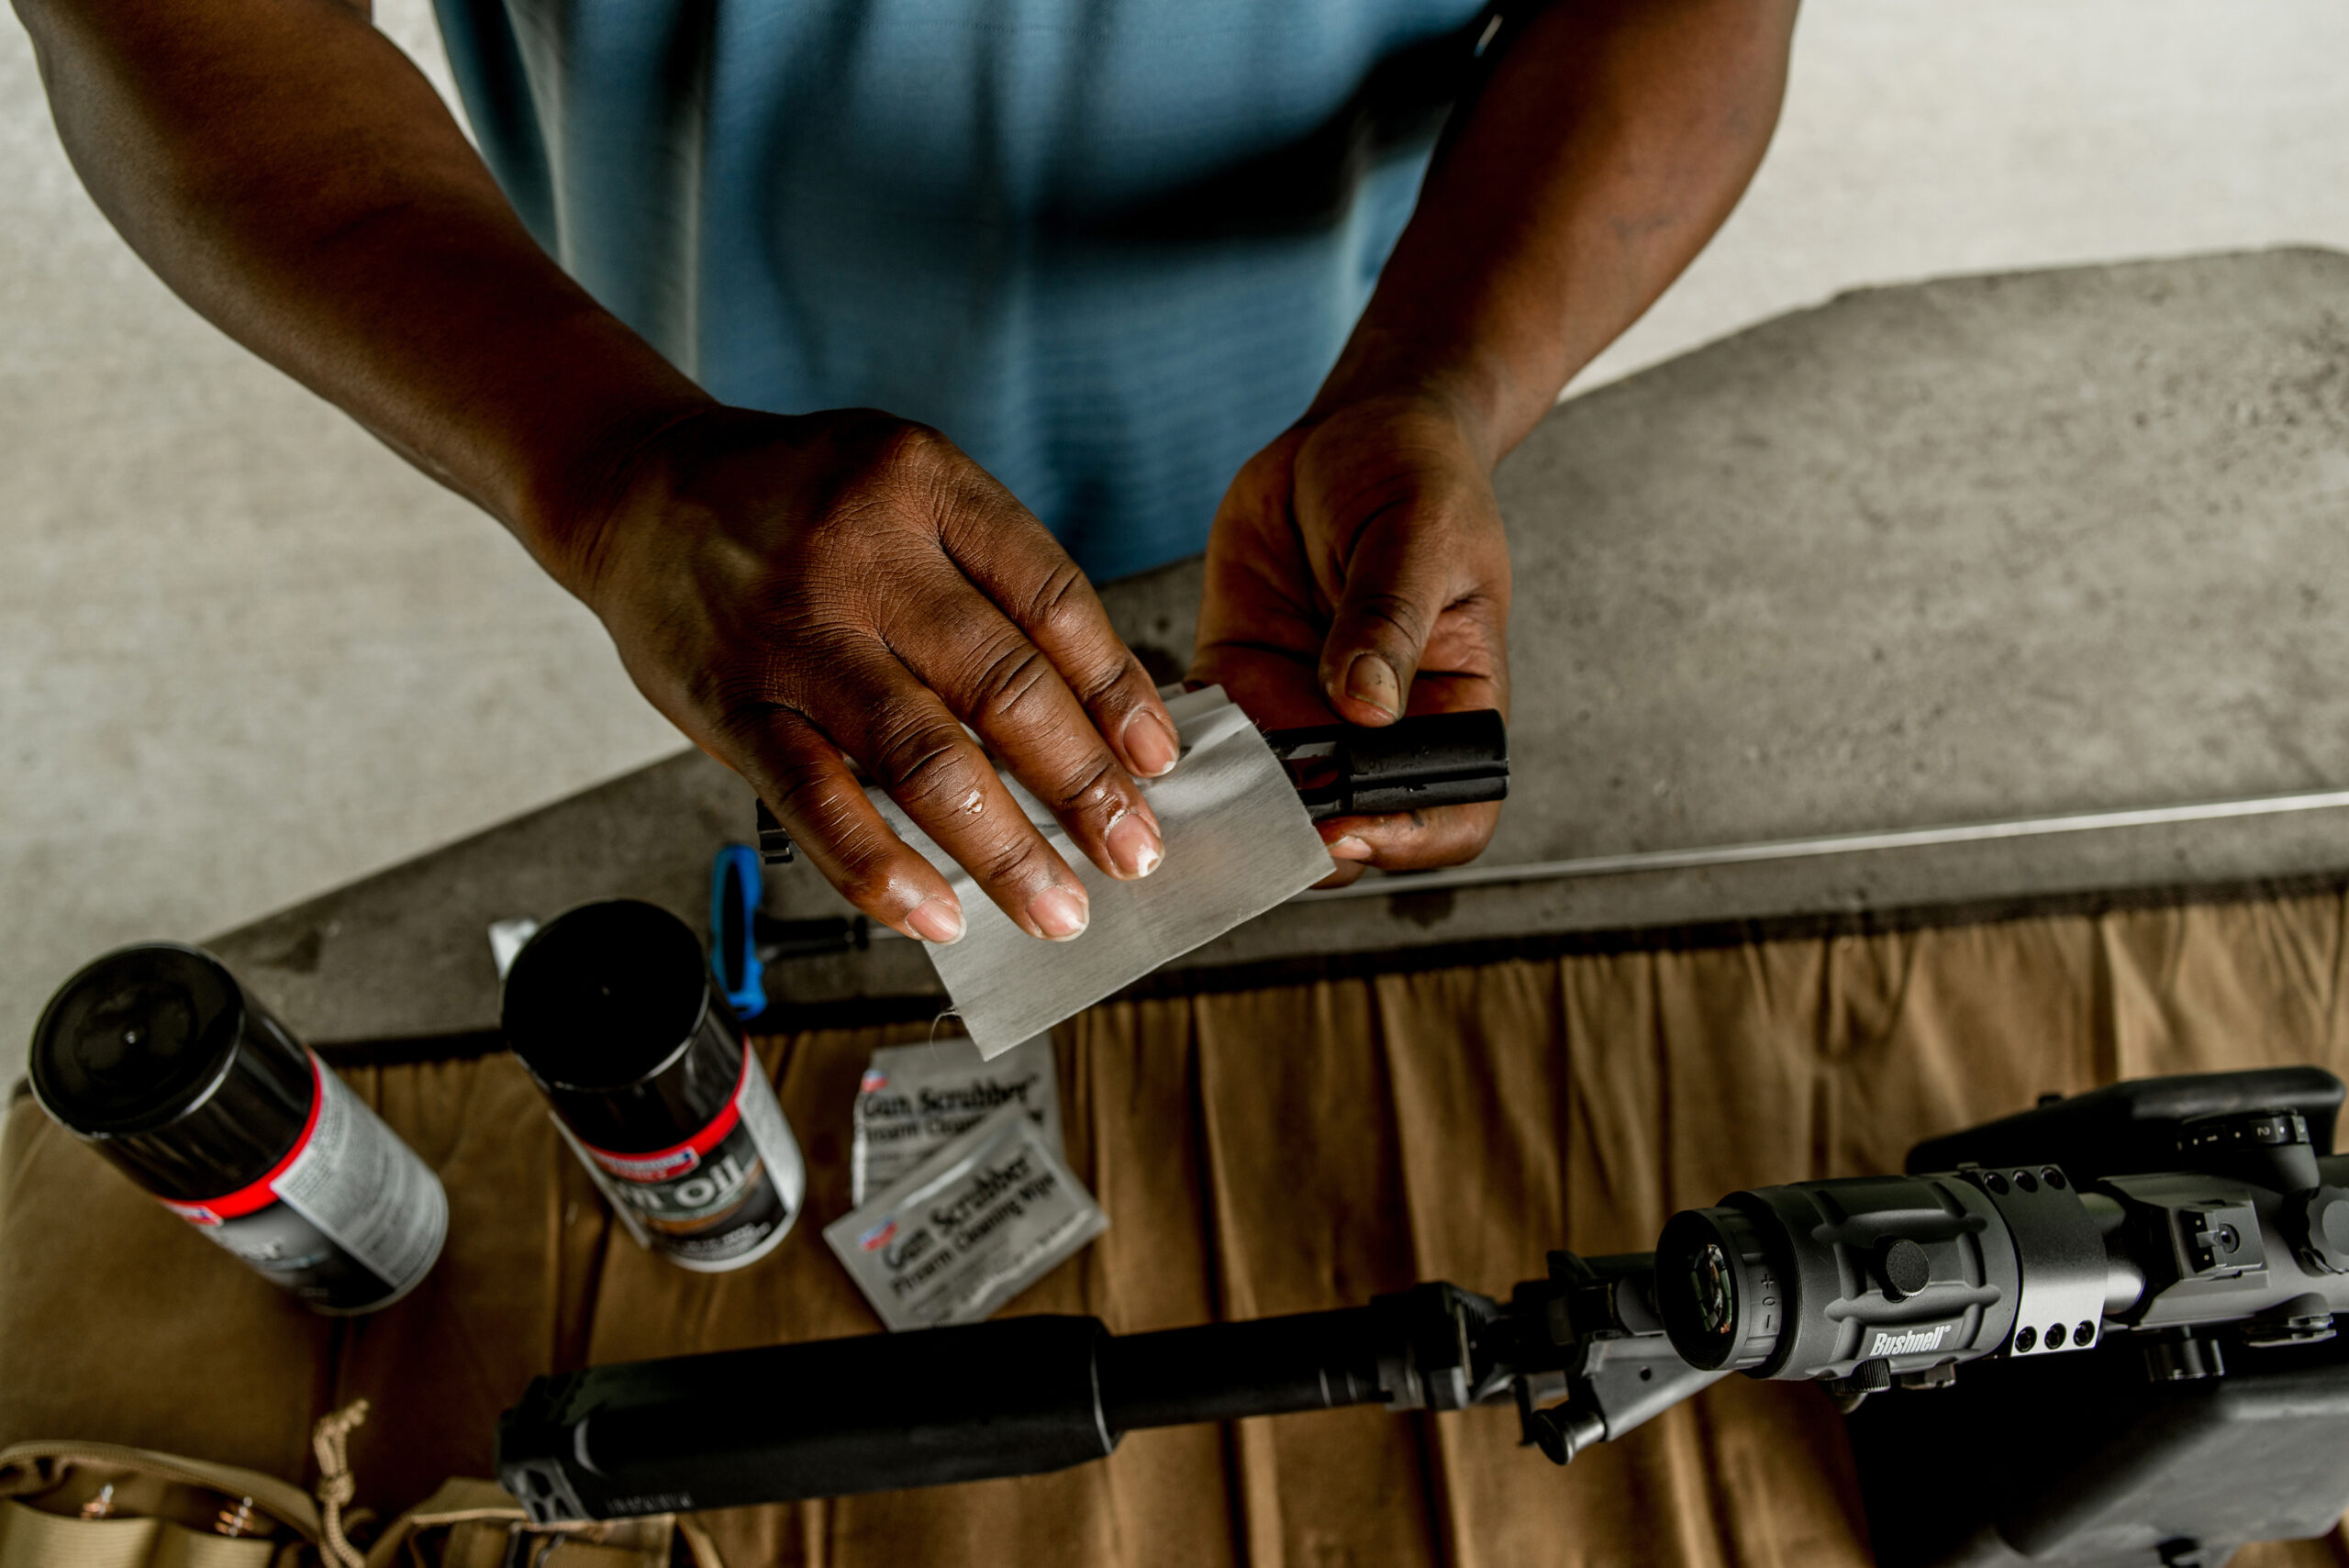 A man at the shooting range cleans the bolt of his firearm.